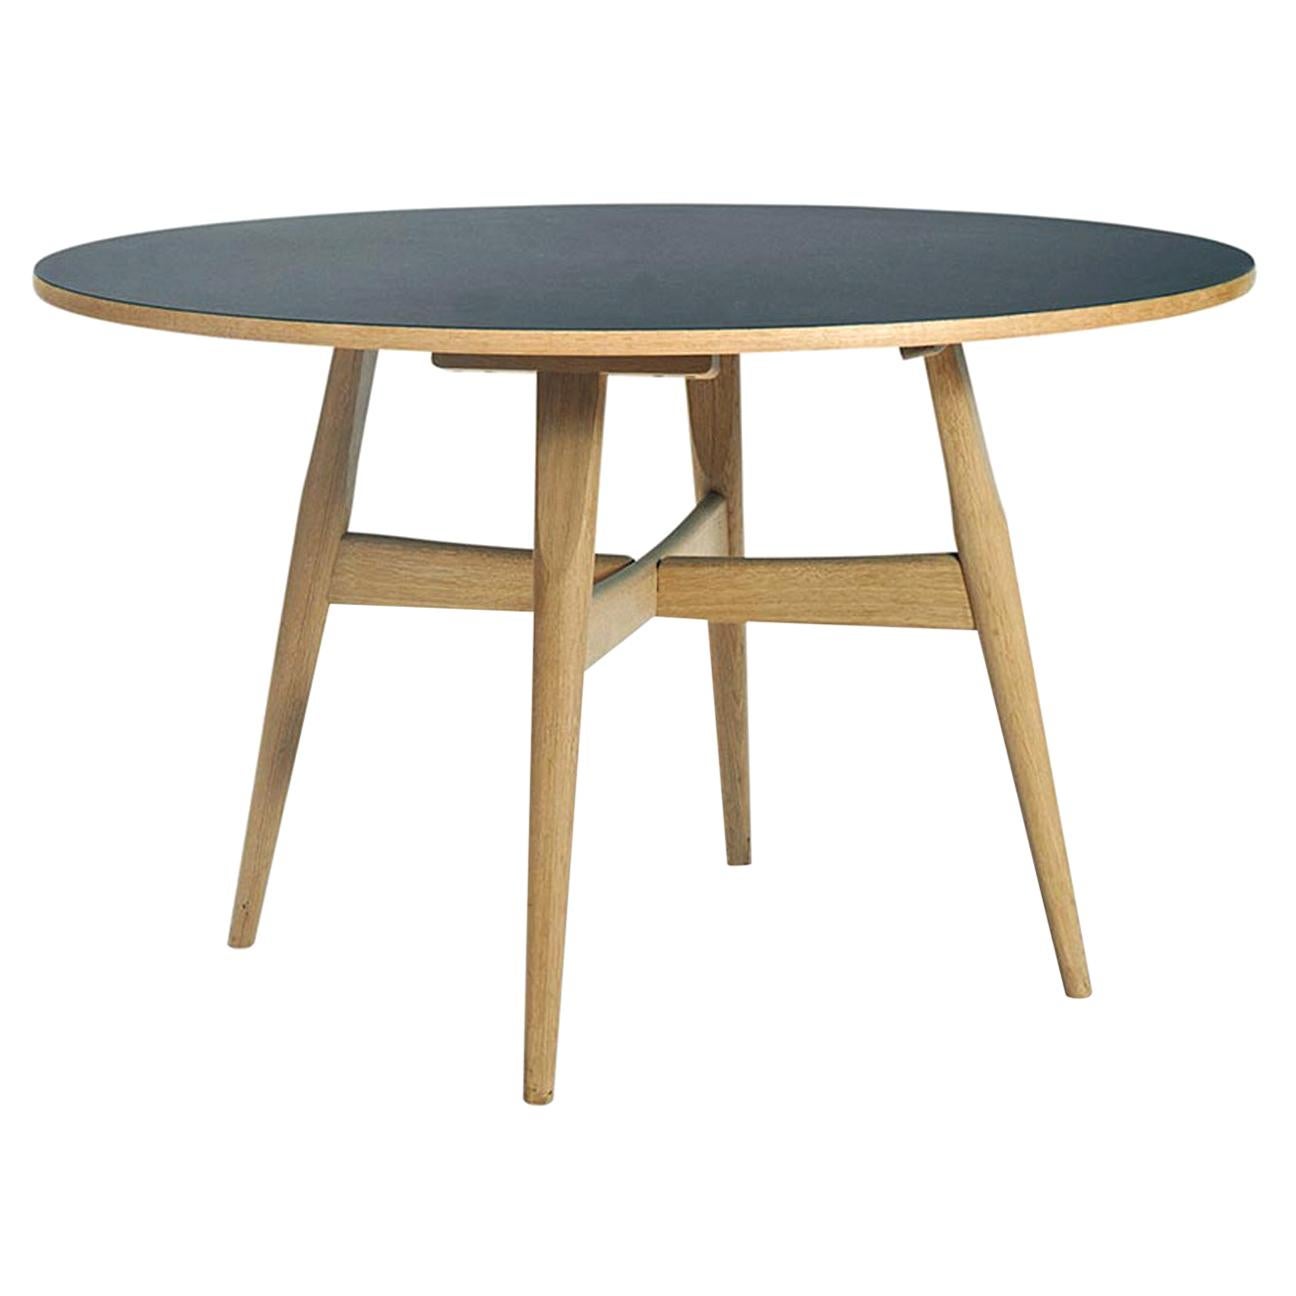 Hans Wegner GE-526 Dining Table, Laminate Top in Oak with Legs in Stained Oak